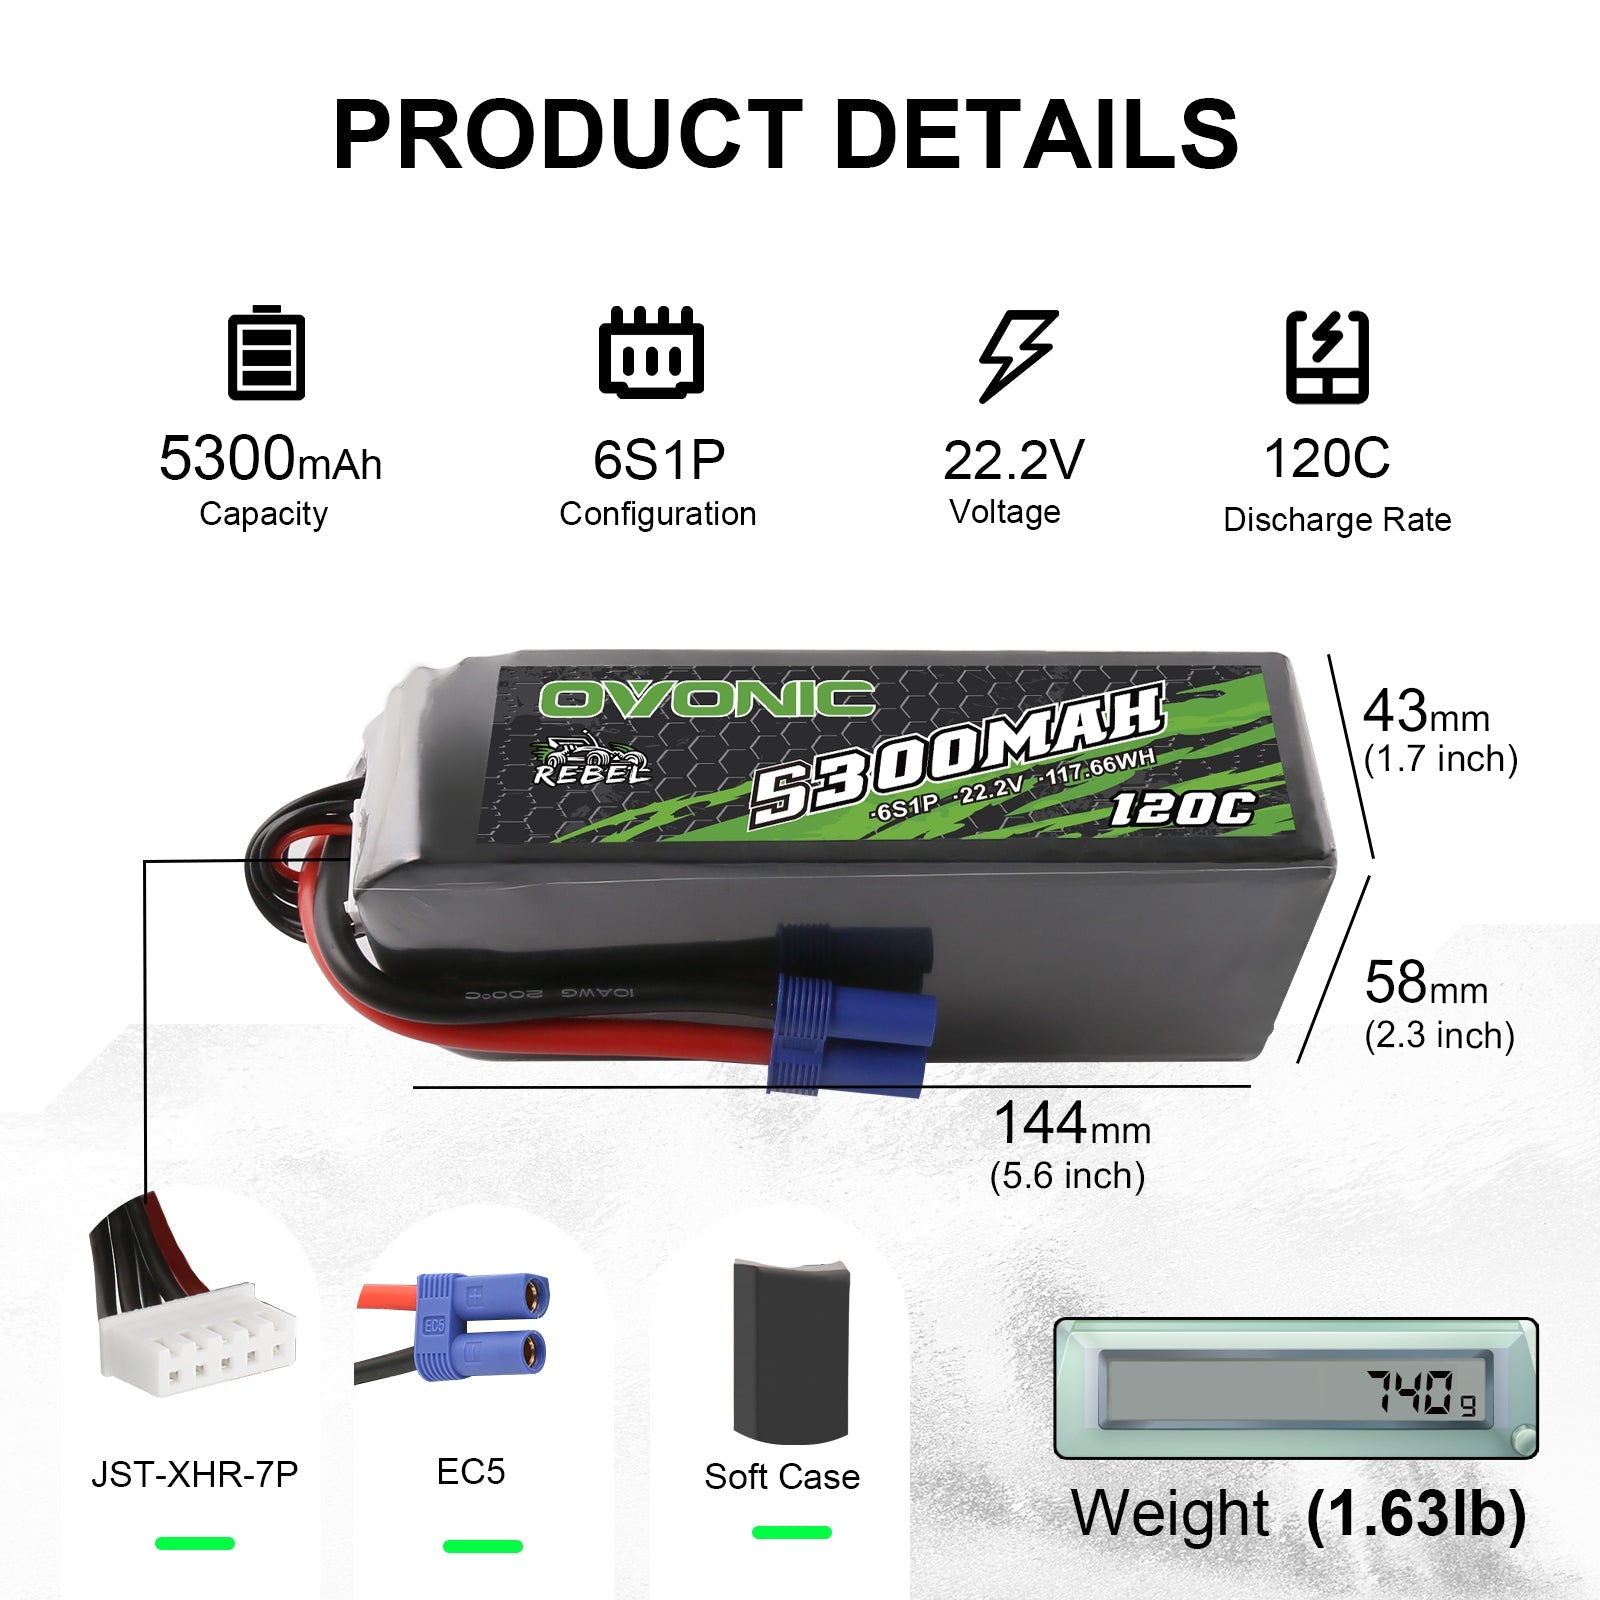 Ovonic Rebel 120C 6S 5300mAh 22.2V LiPo Battery with EC5 Plug for TRA car